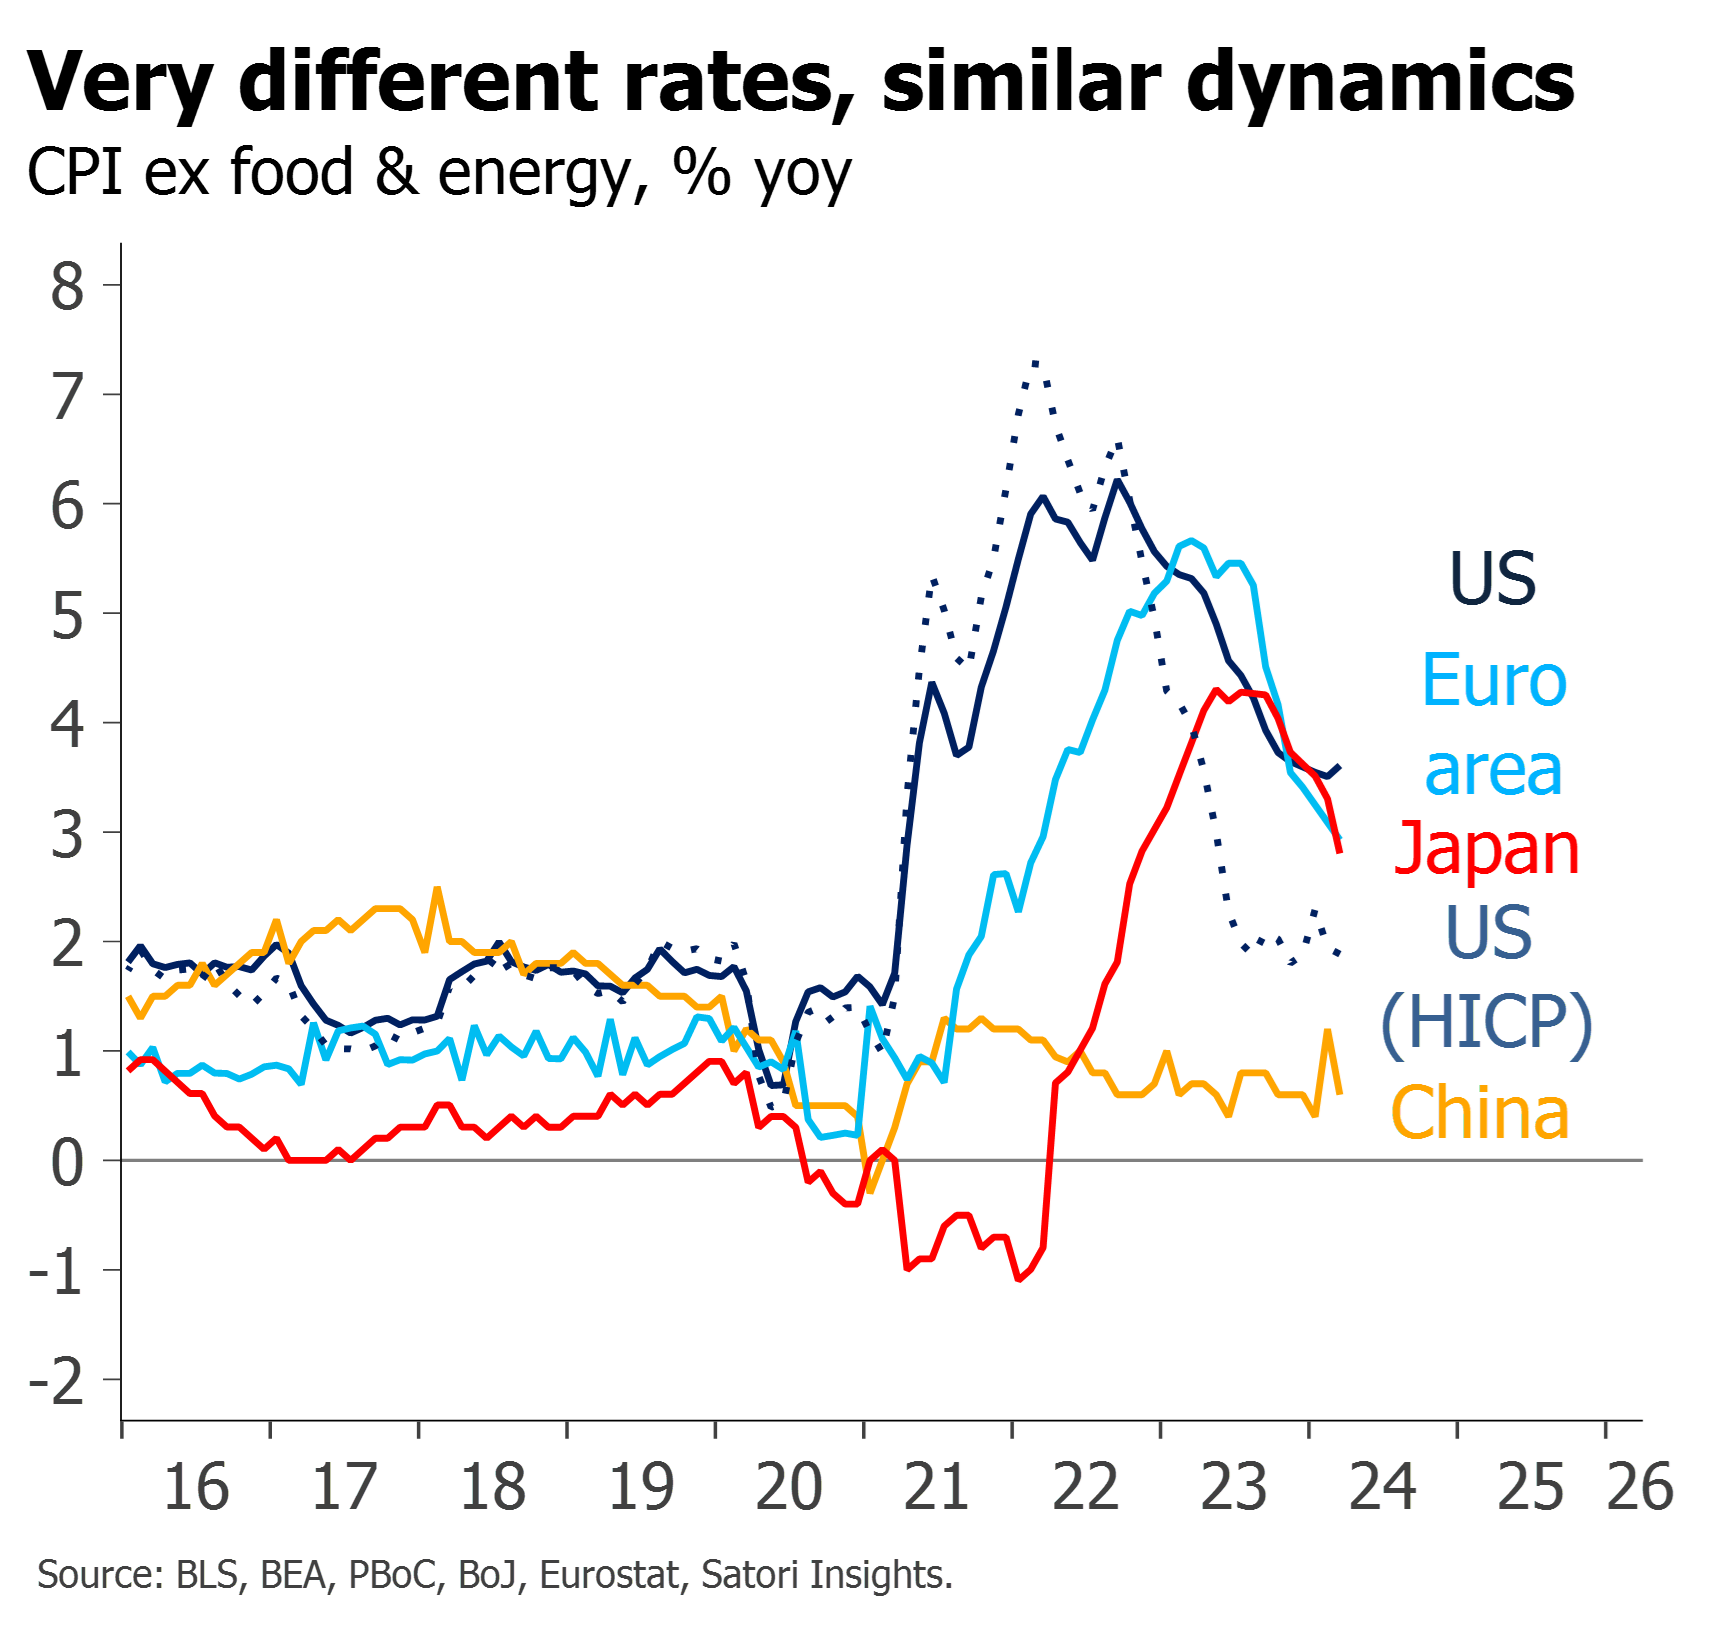 Core CPI following similar dynamics despite different rates in US, Japan, Euro area and China